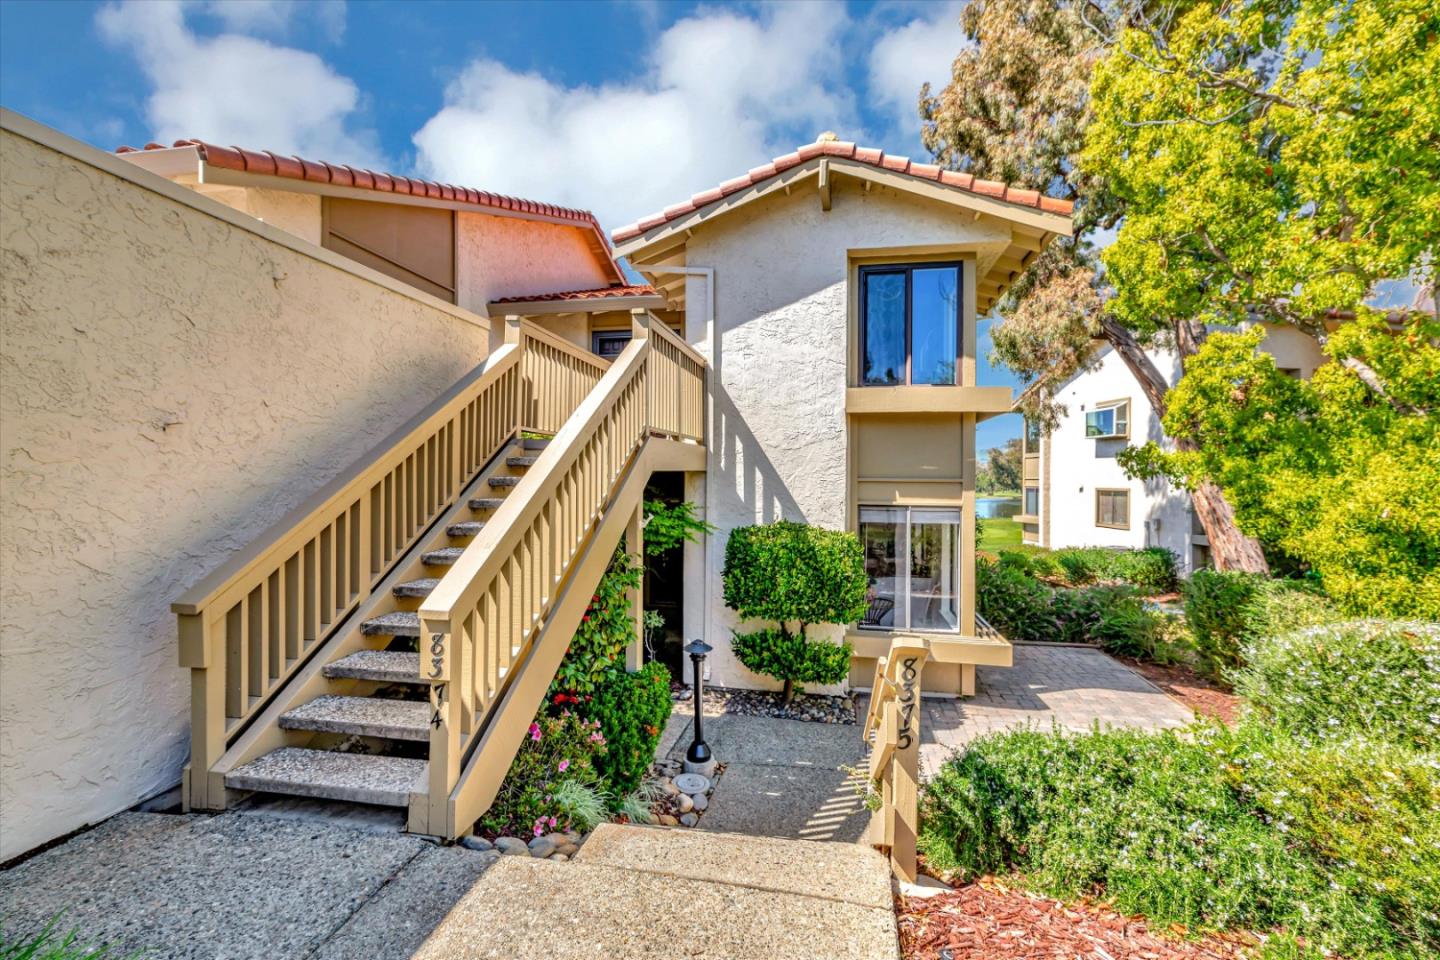 Photo of 8375 Riesling Wy in San Jose, CA